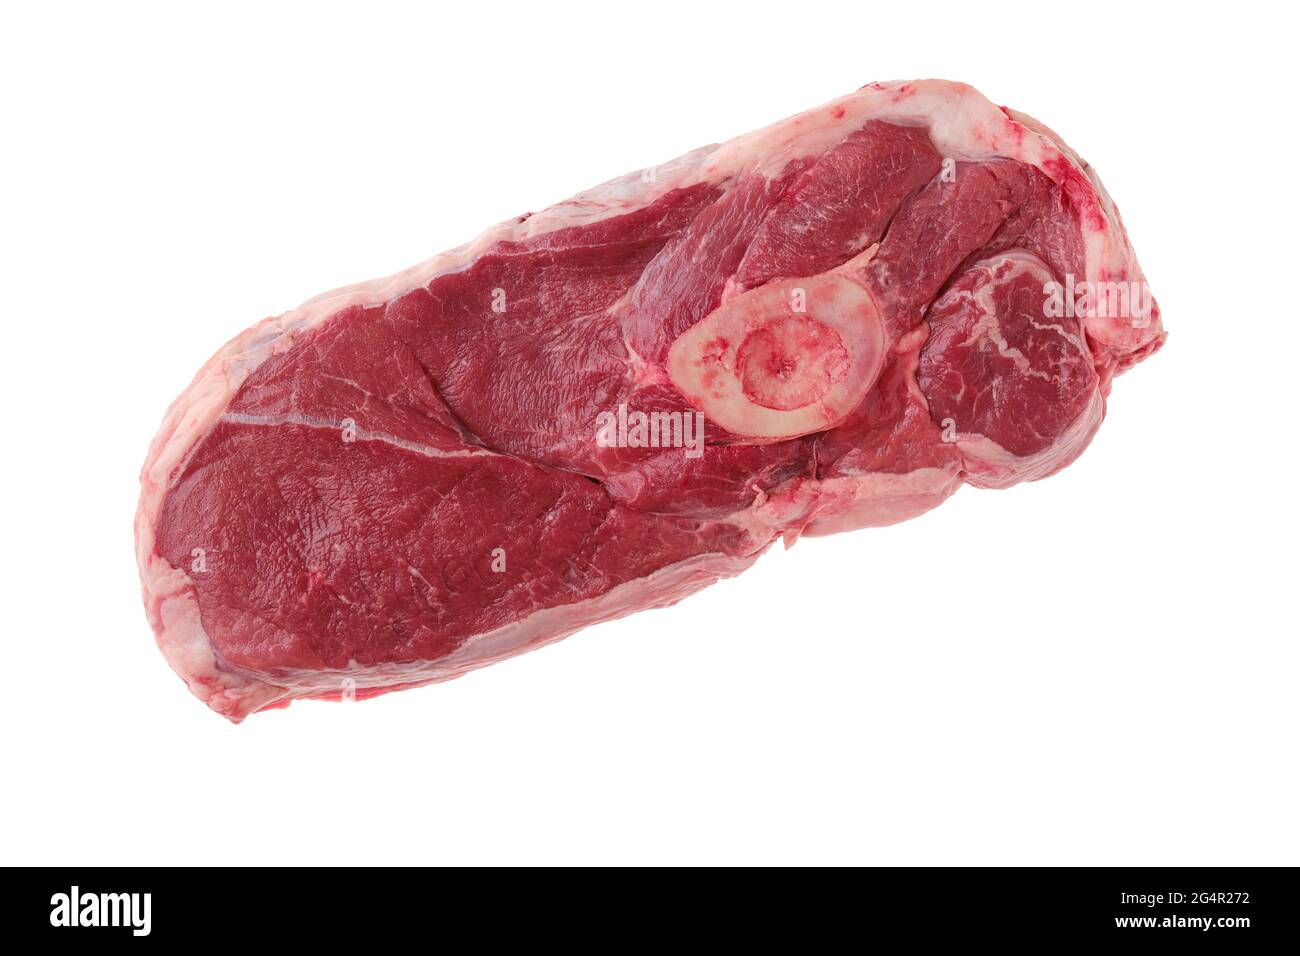 Overhead view of raw chuck eye steak isolated on white background Stock Photo